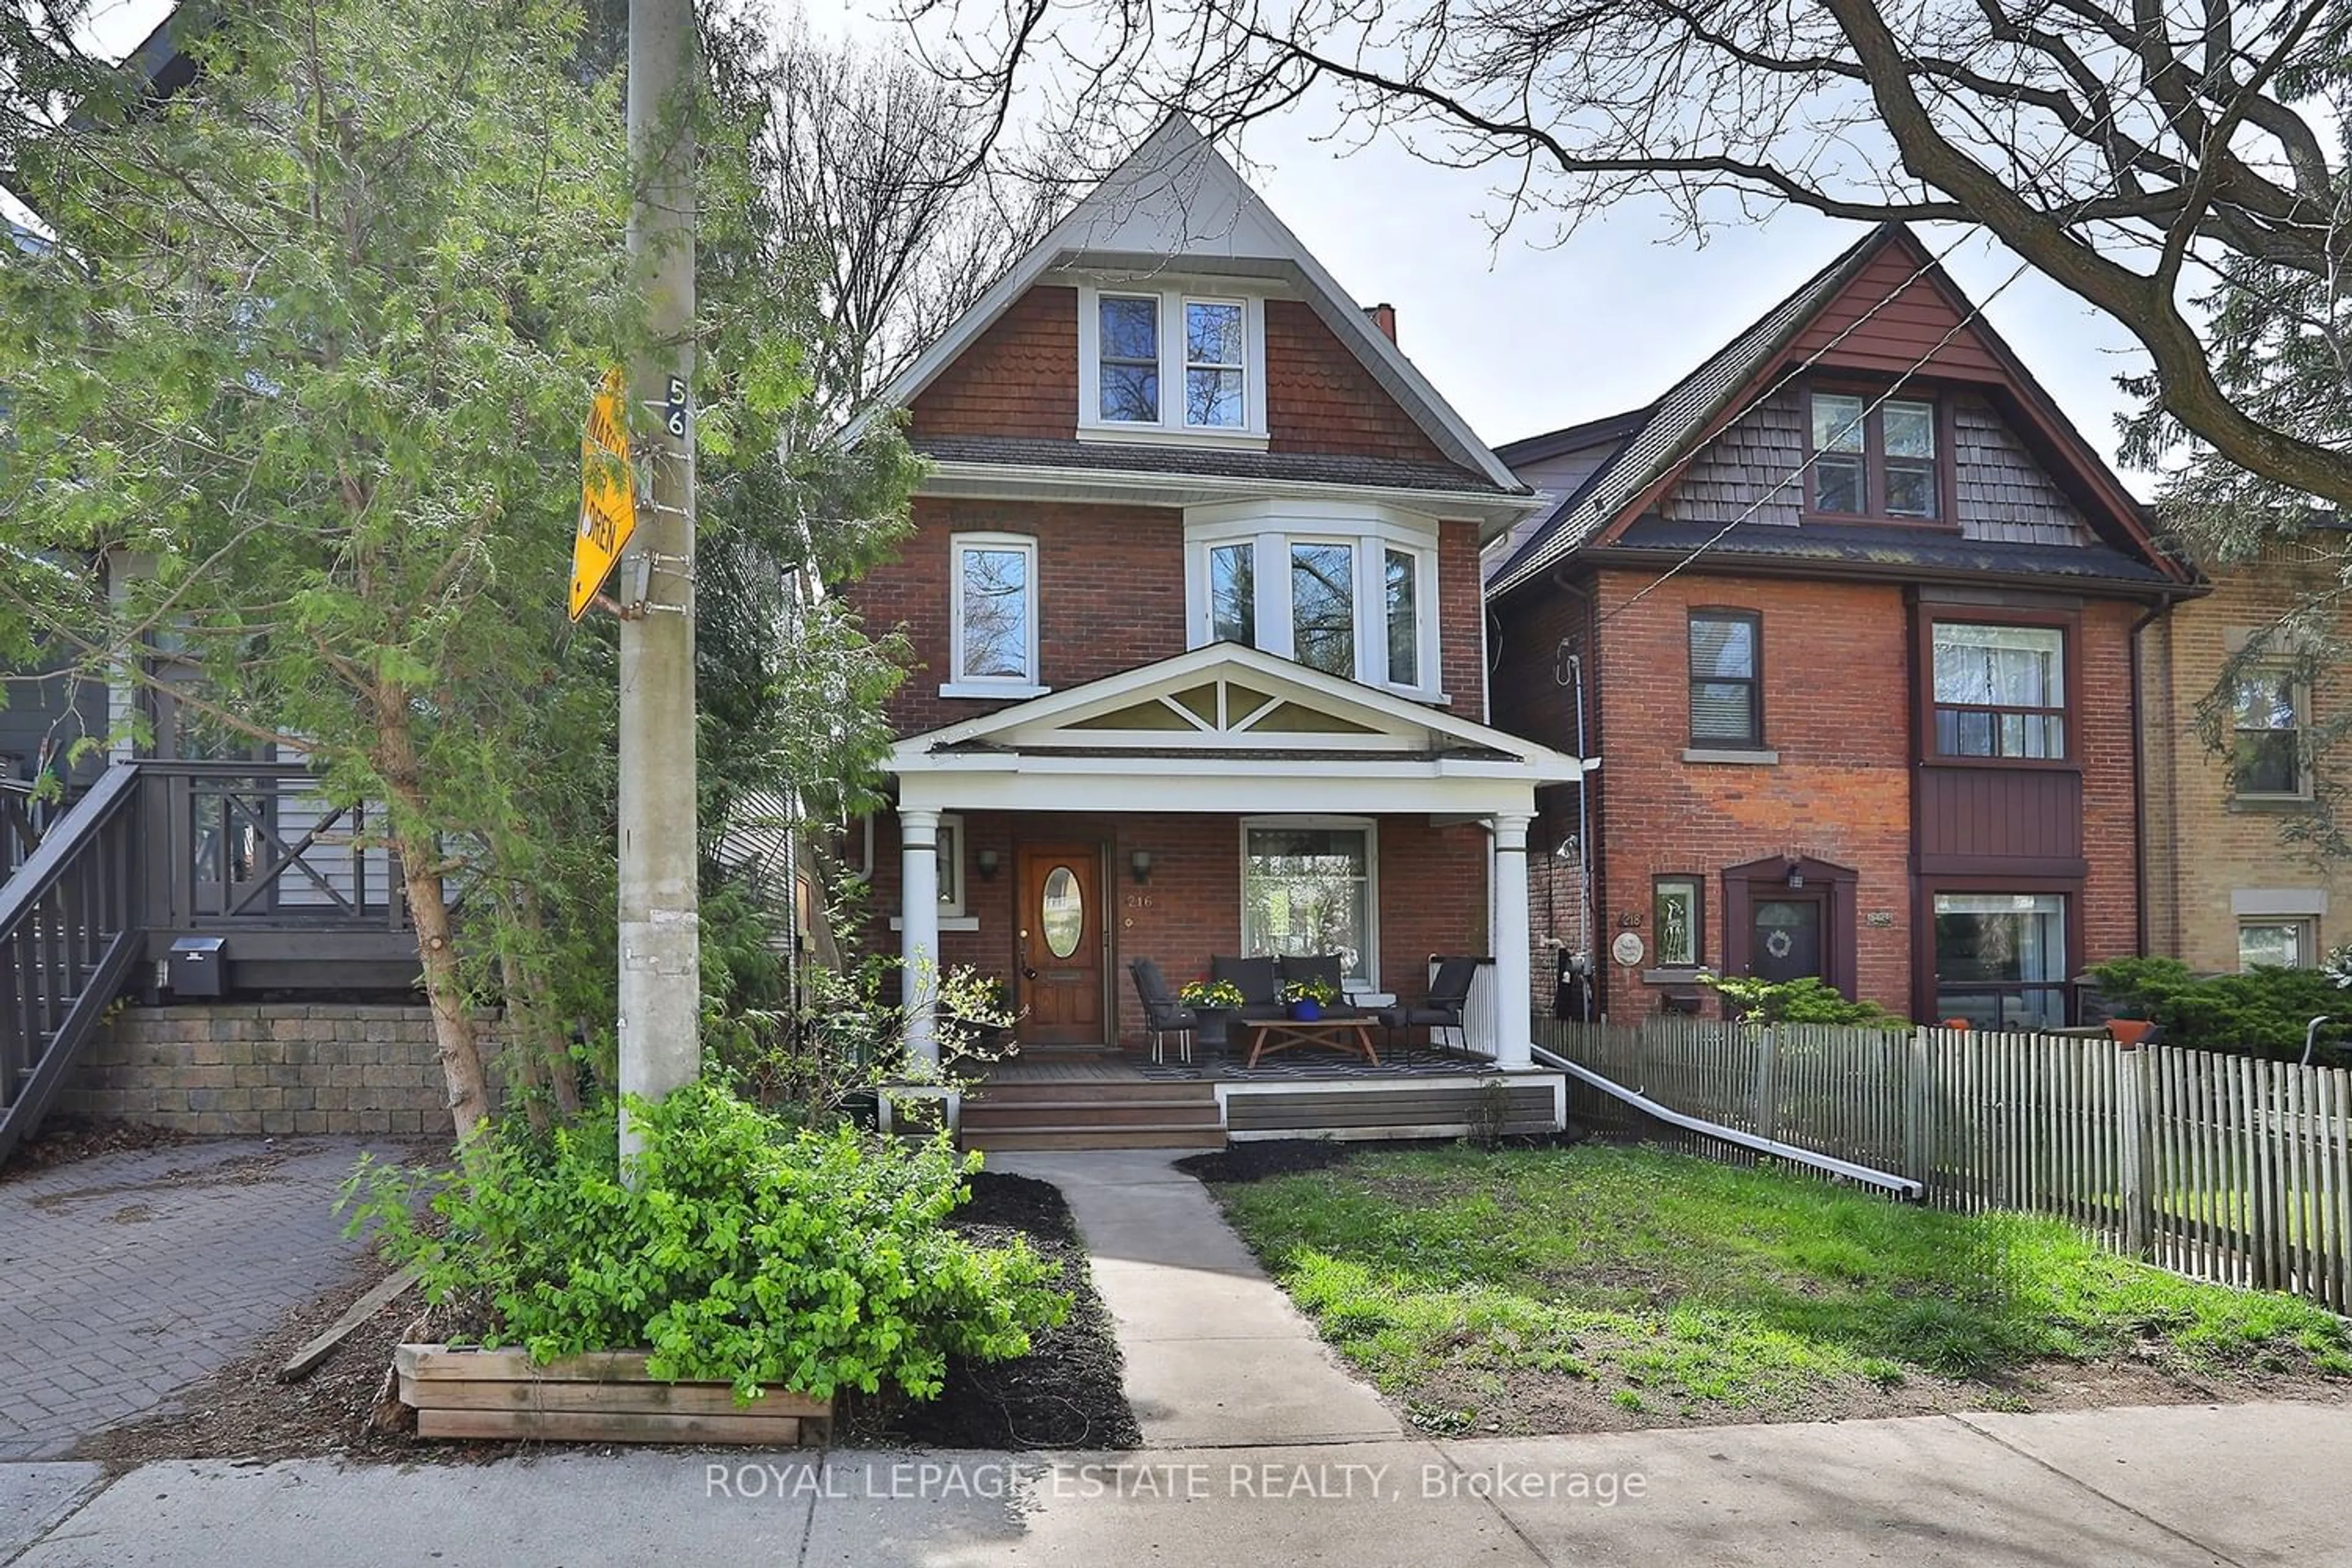 Home with brick exterior material for 216 Waverley Rd, Toronto Ontario M4L 3T3